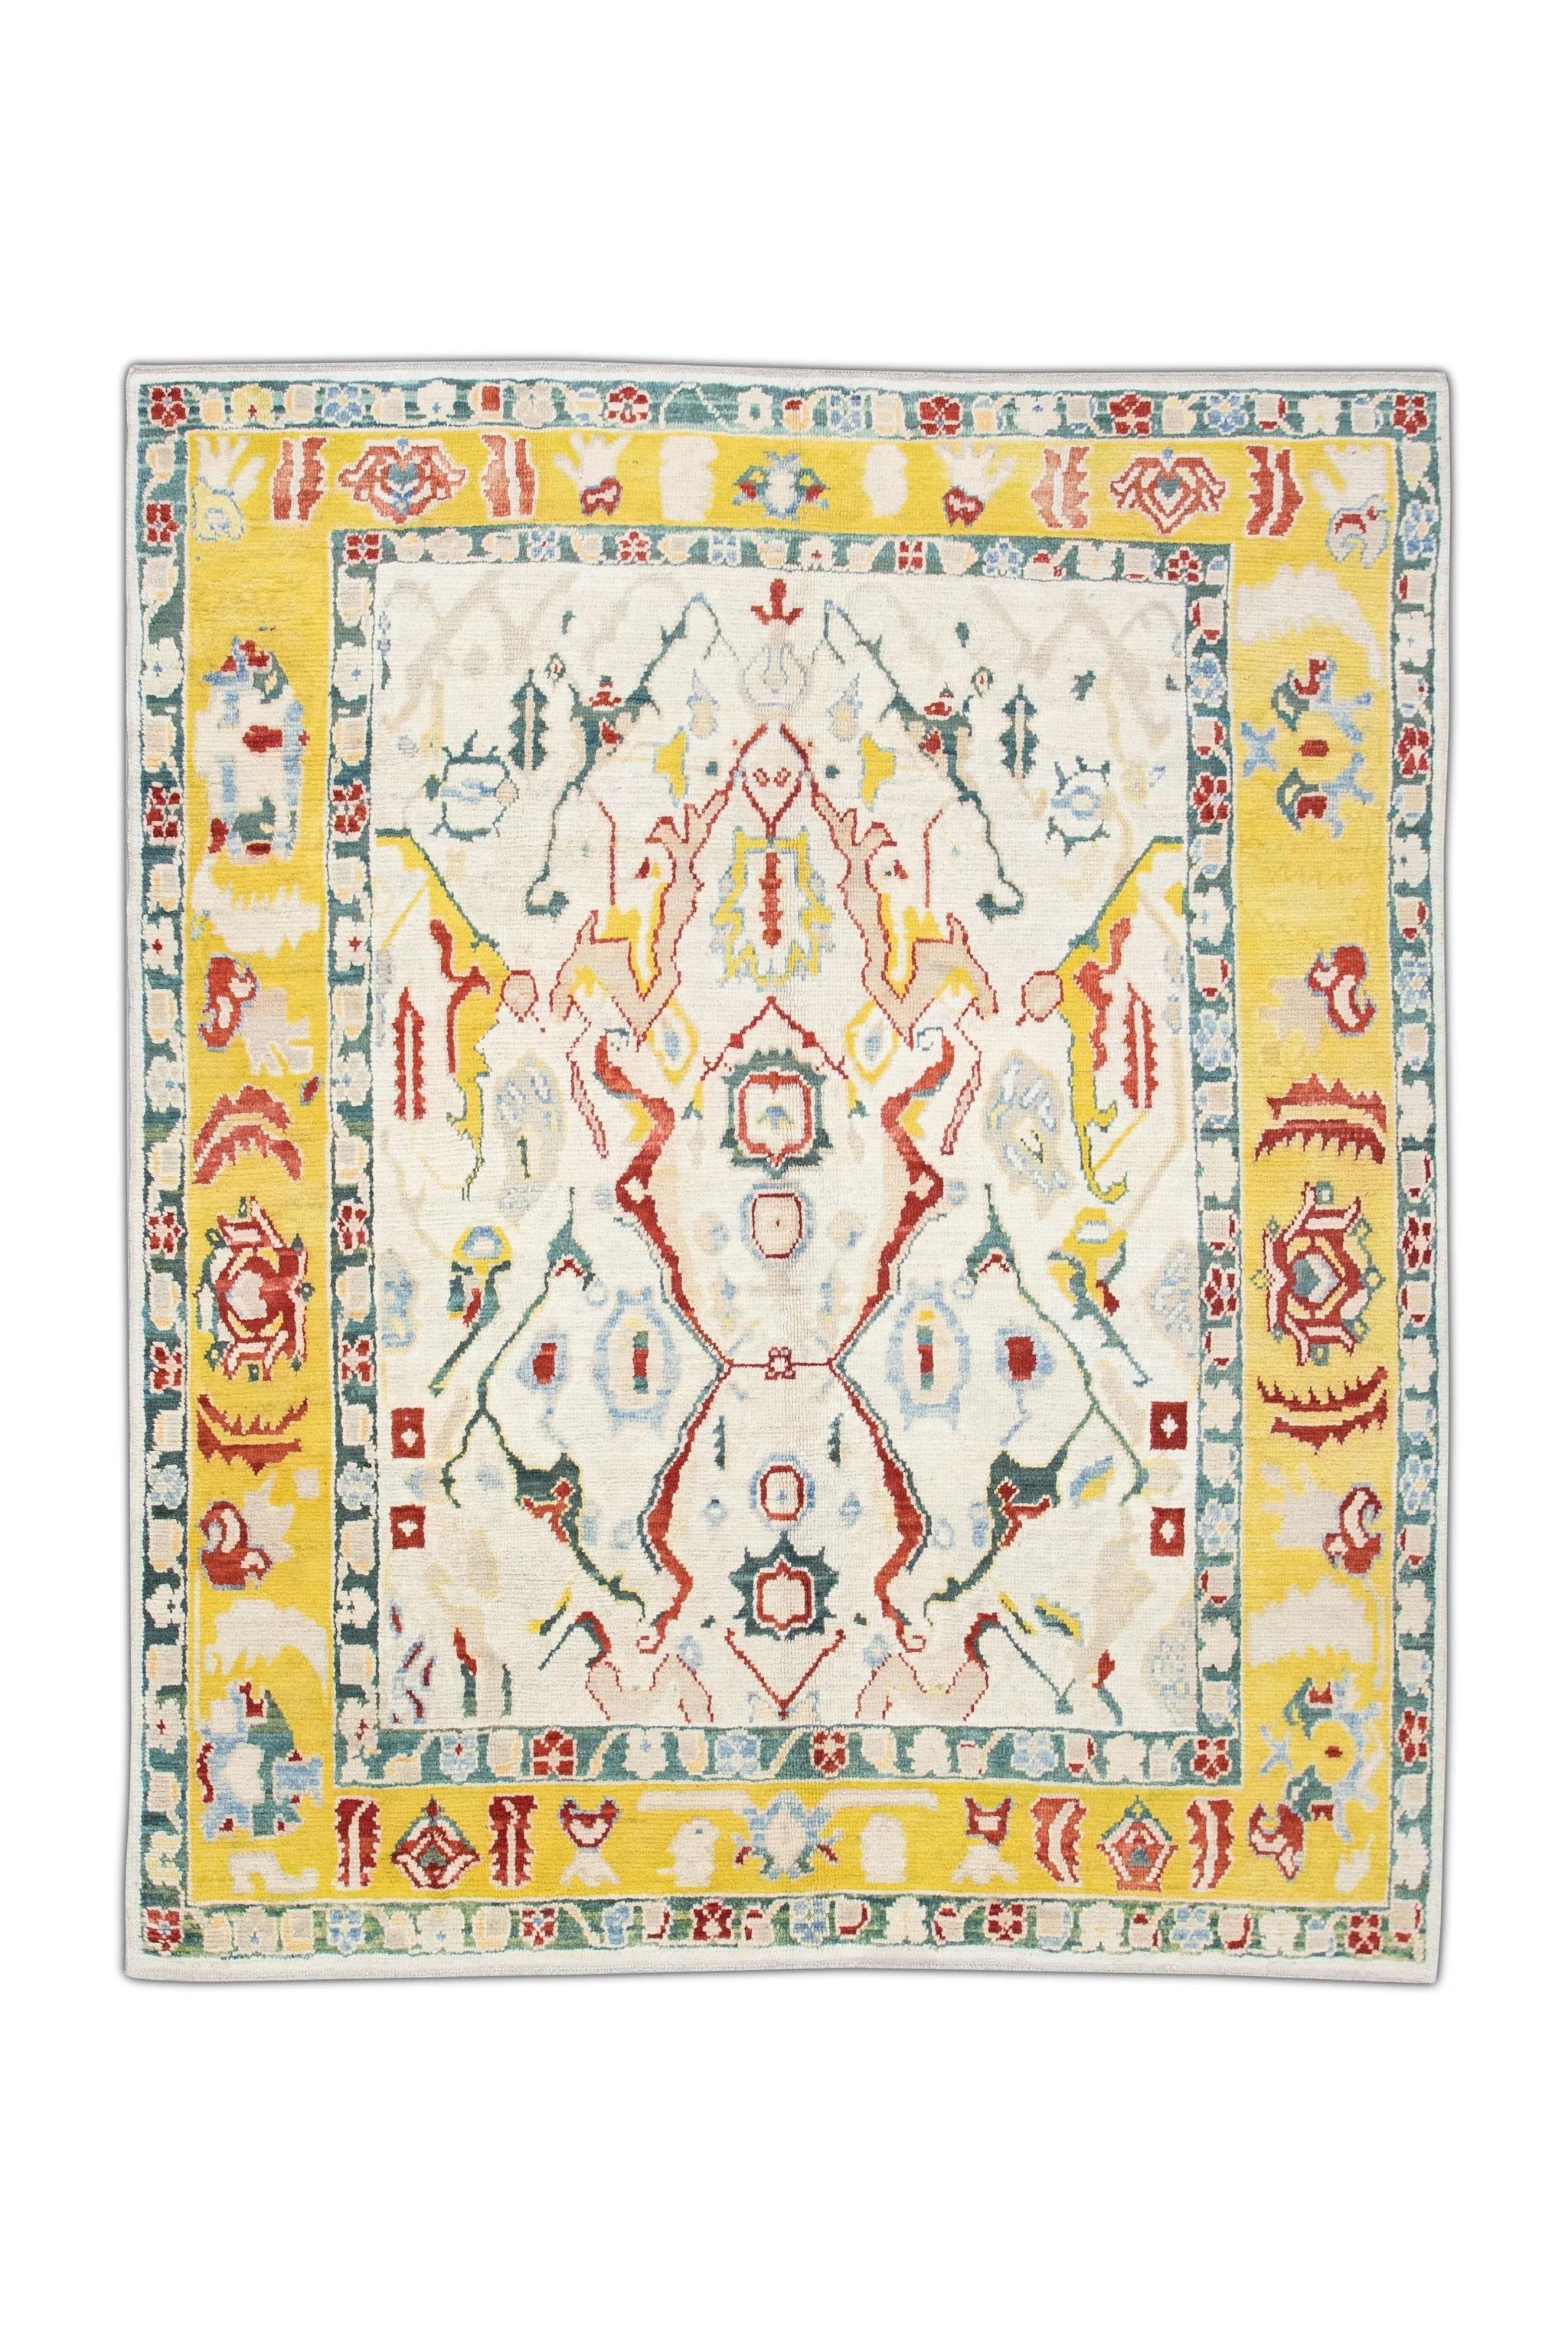 Handwoven Wool Floral Turkish Oushak Rug in Green, Yellow & Red 8'1